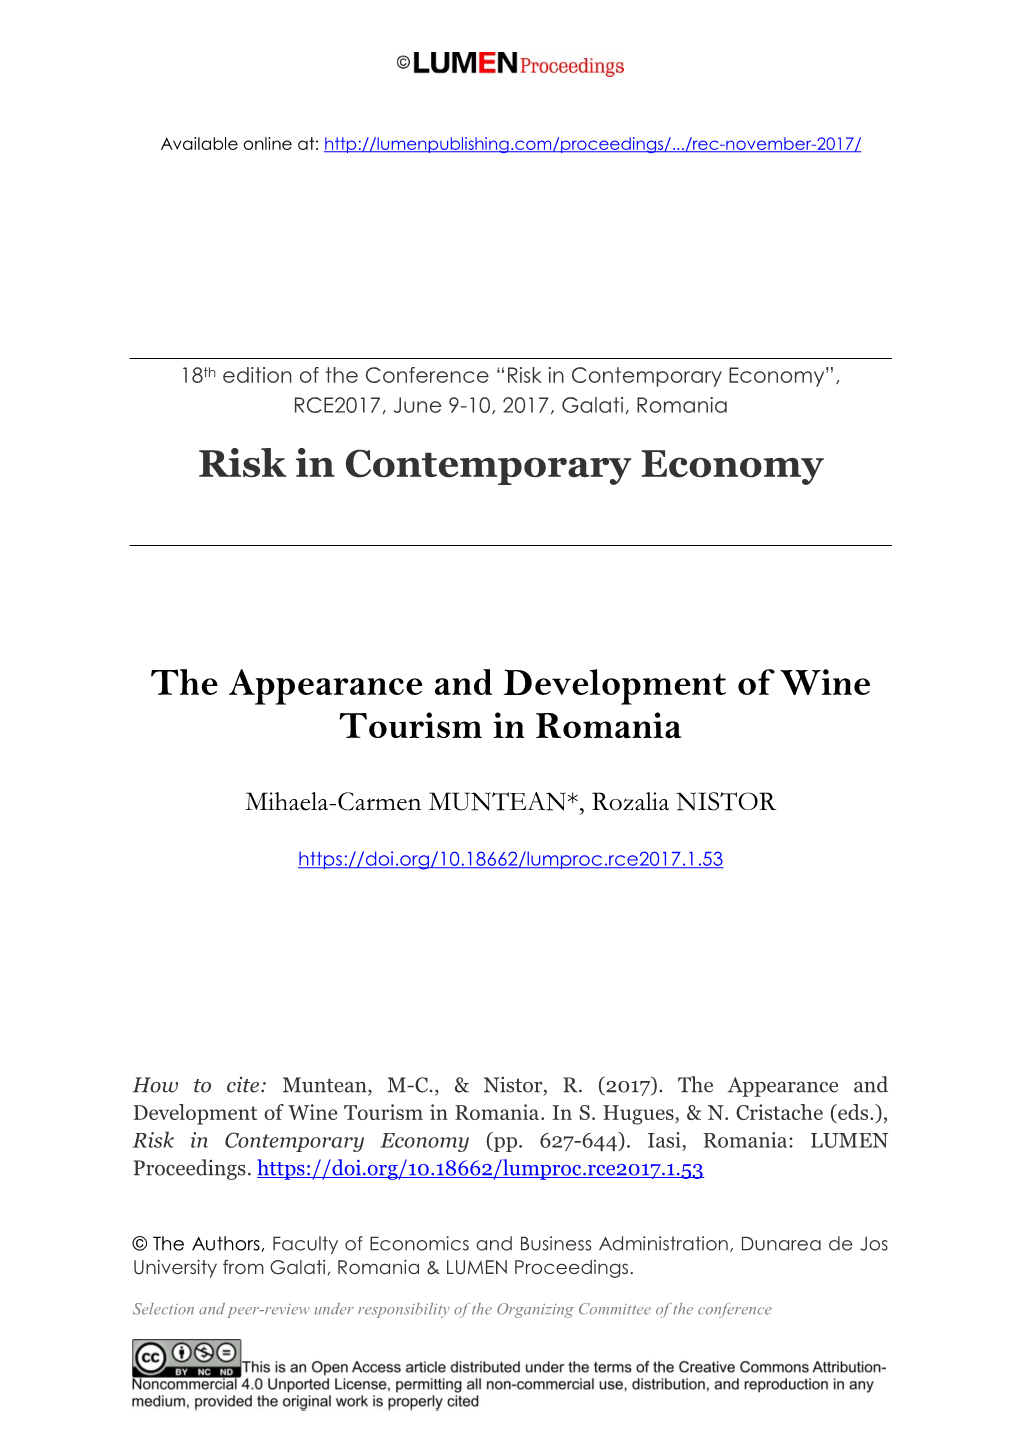 Risk in Contemporary Economy the Appearance and Development of Wine Tourism in Romania